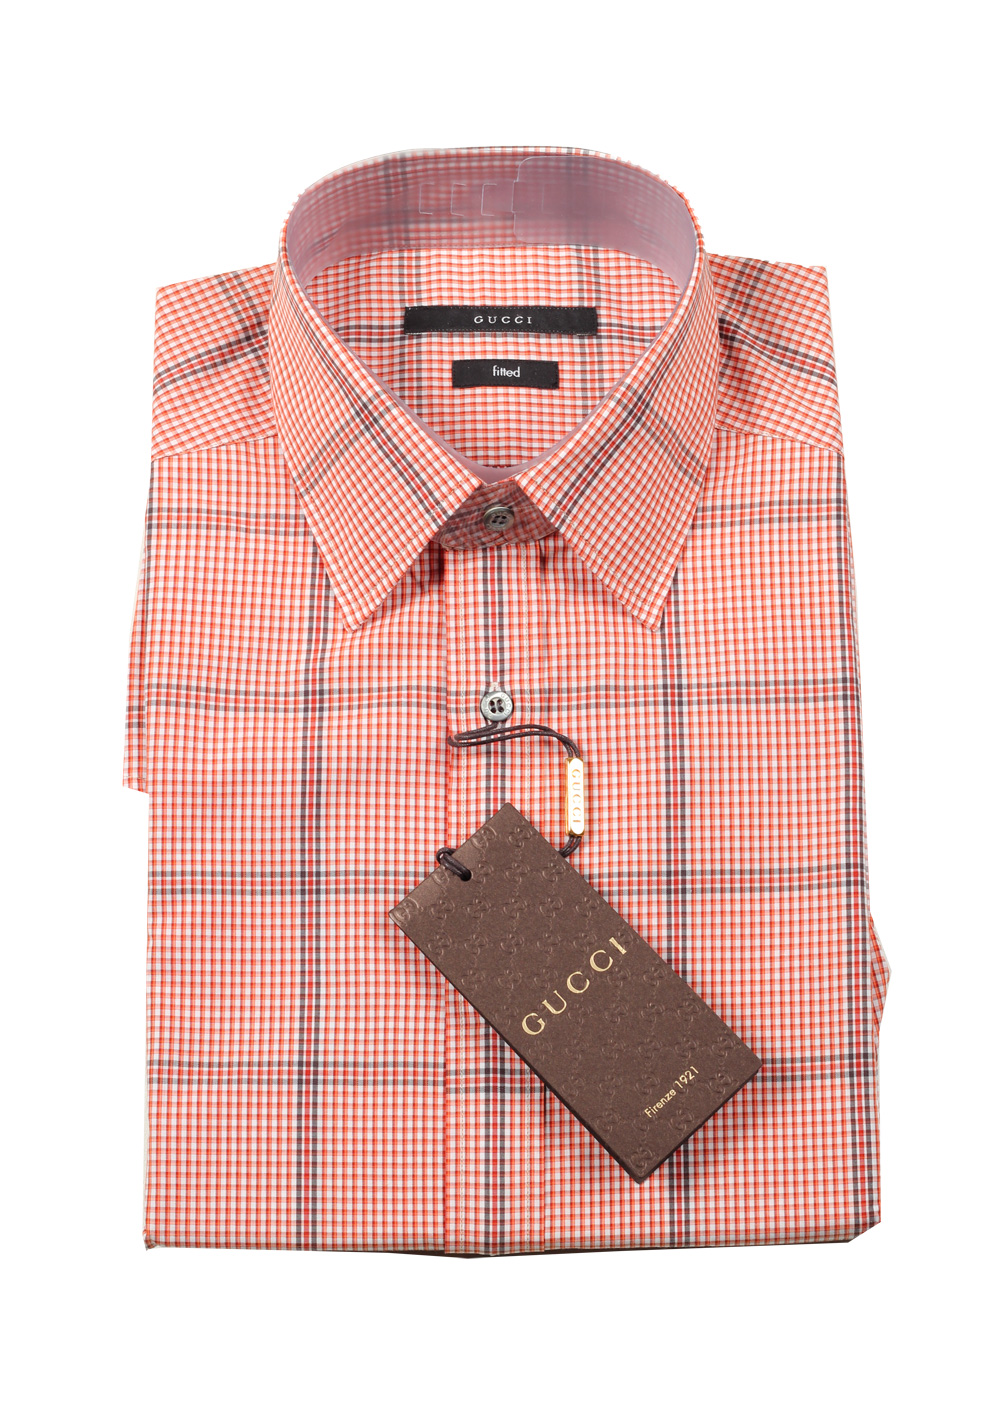 Gucci Checked Orange Dress Shirt Size 40 / 15,75 U.S. Fitted | Costume Limité